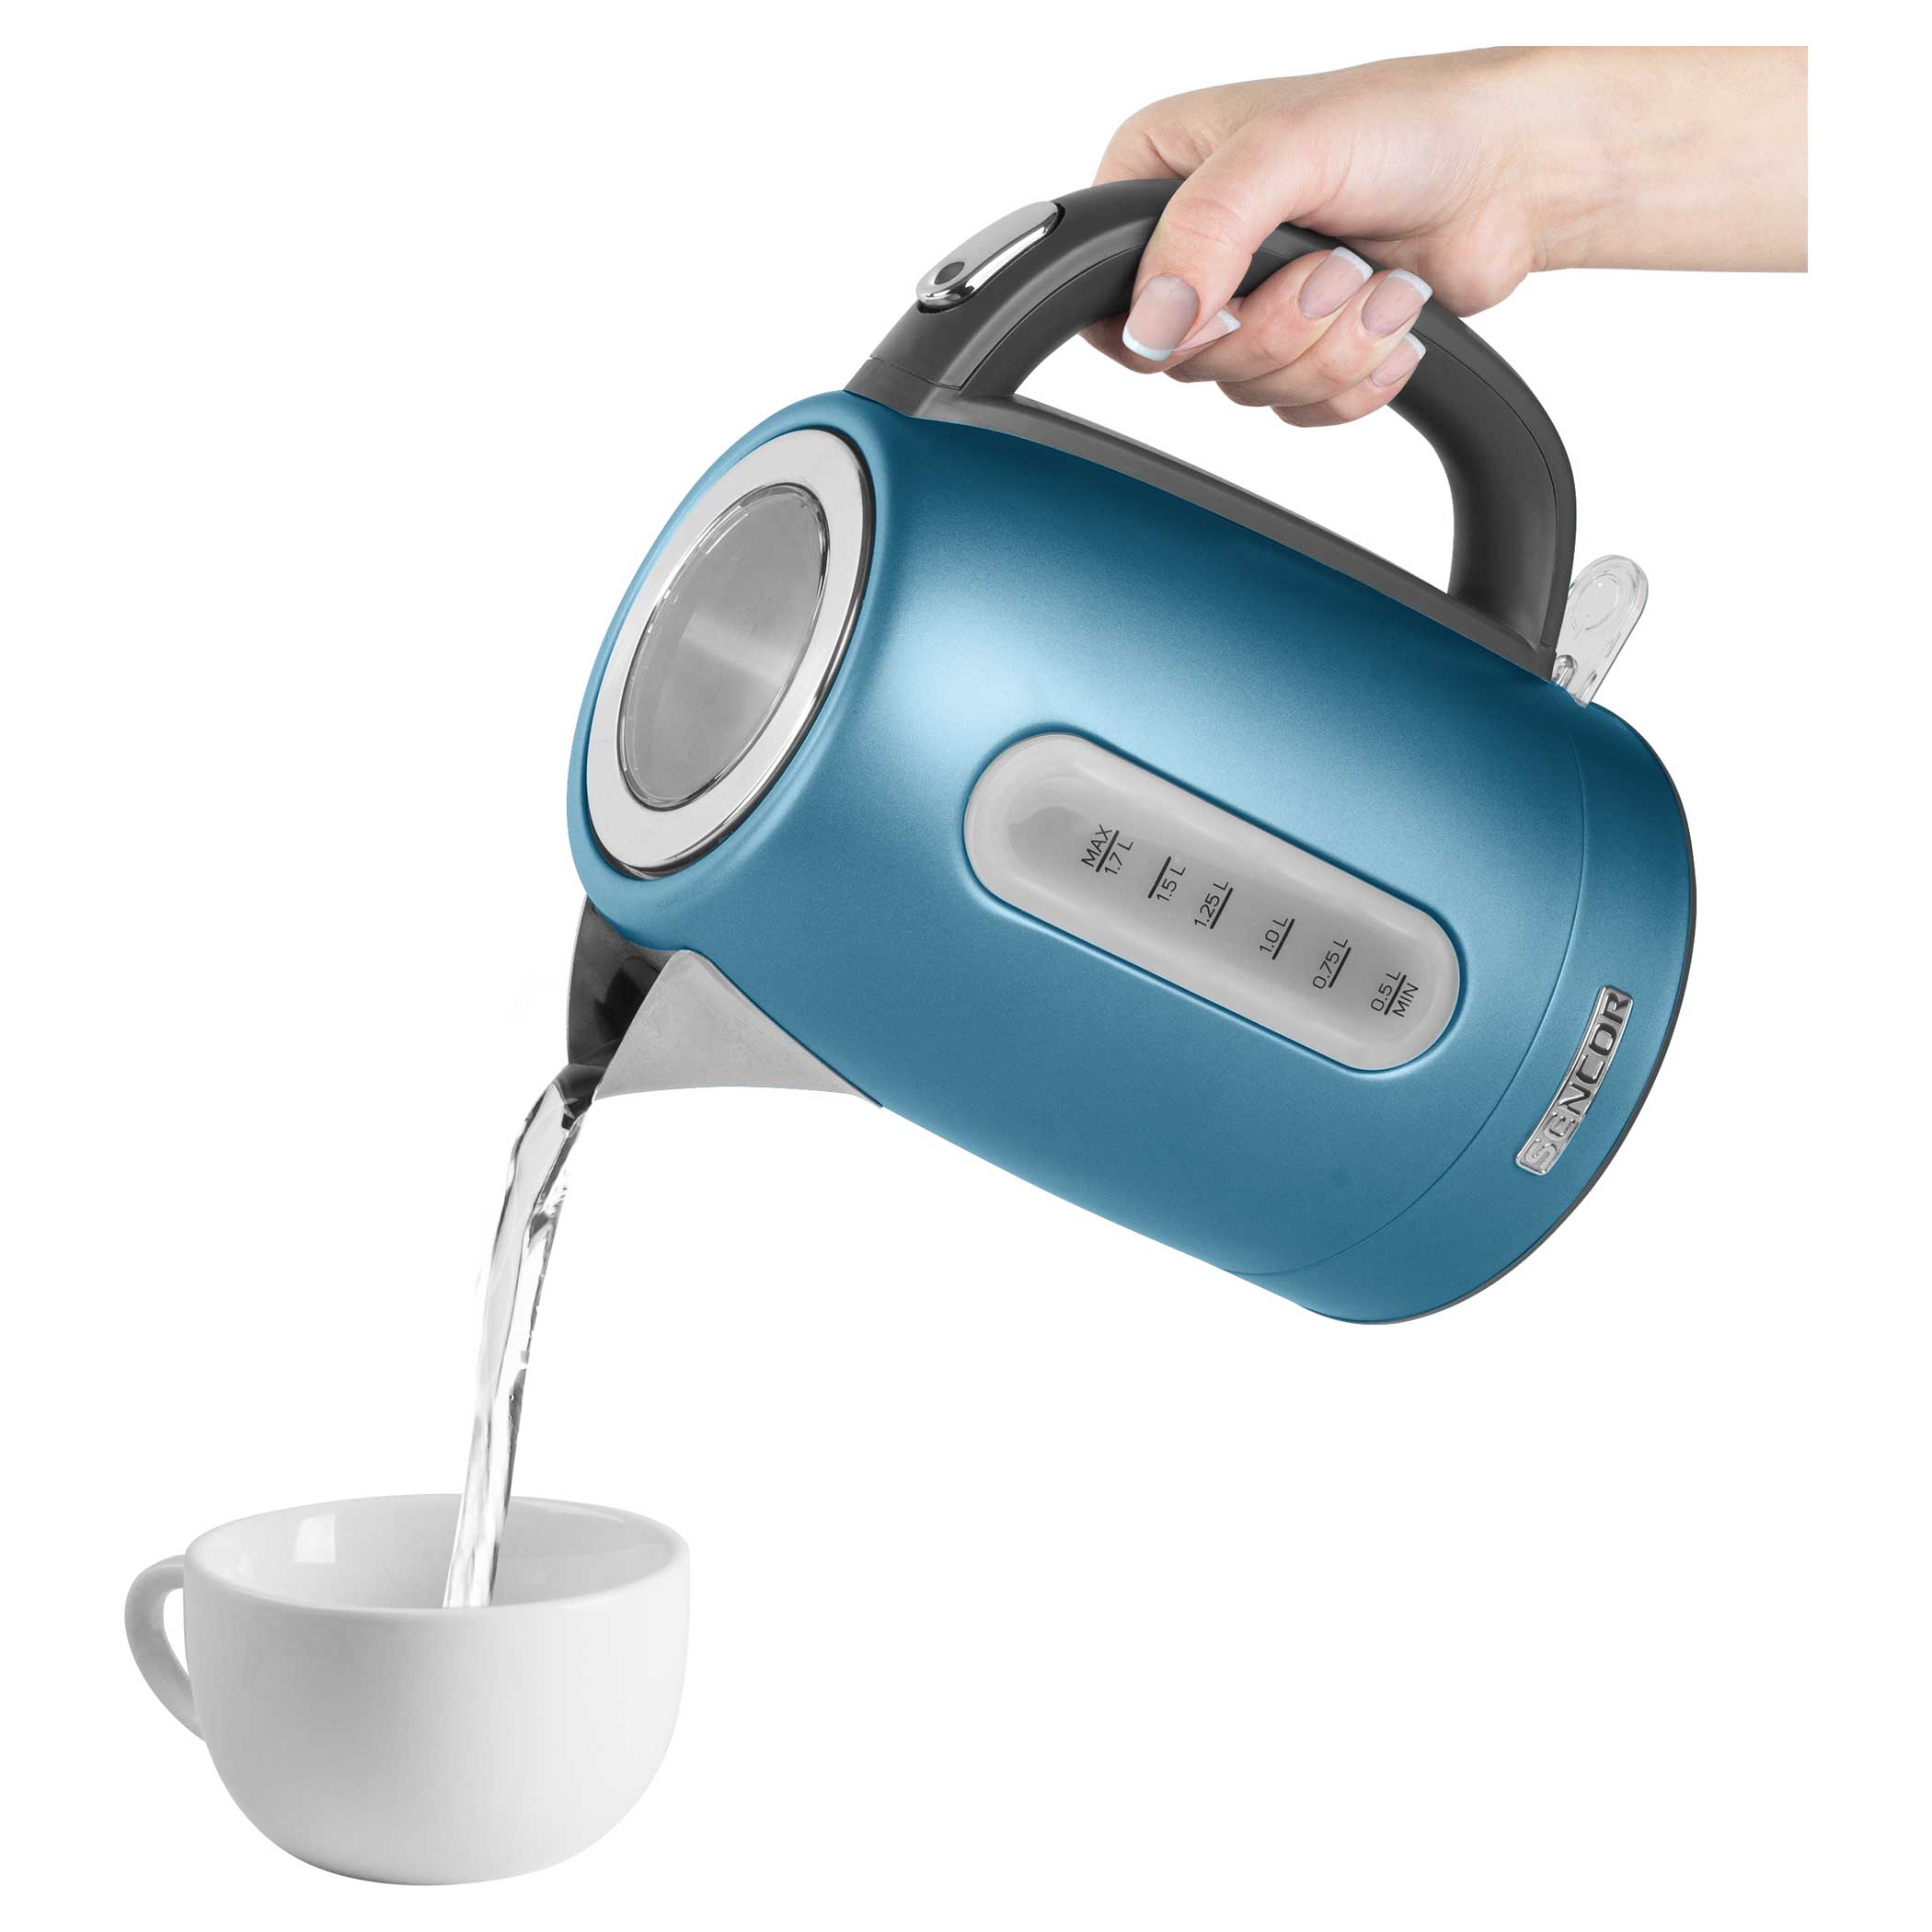 Sencor SWK1571BL Electric Kettle with Display and Power Cord Base, Blue  (Metallic) 